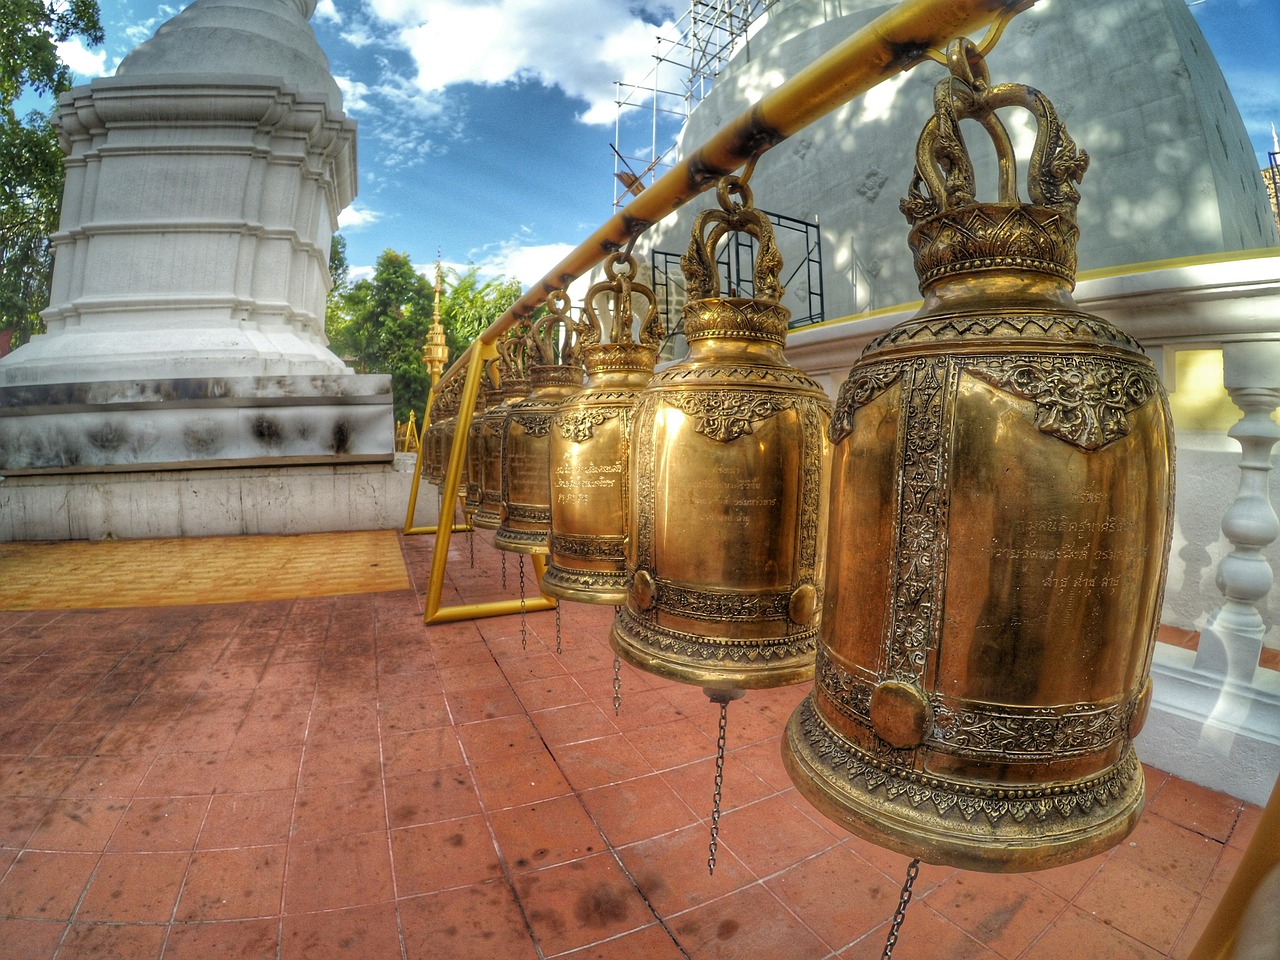 Budget Travel Guide to Chiang Mai